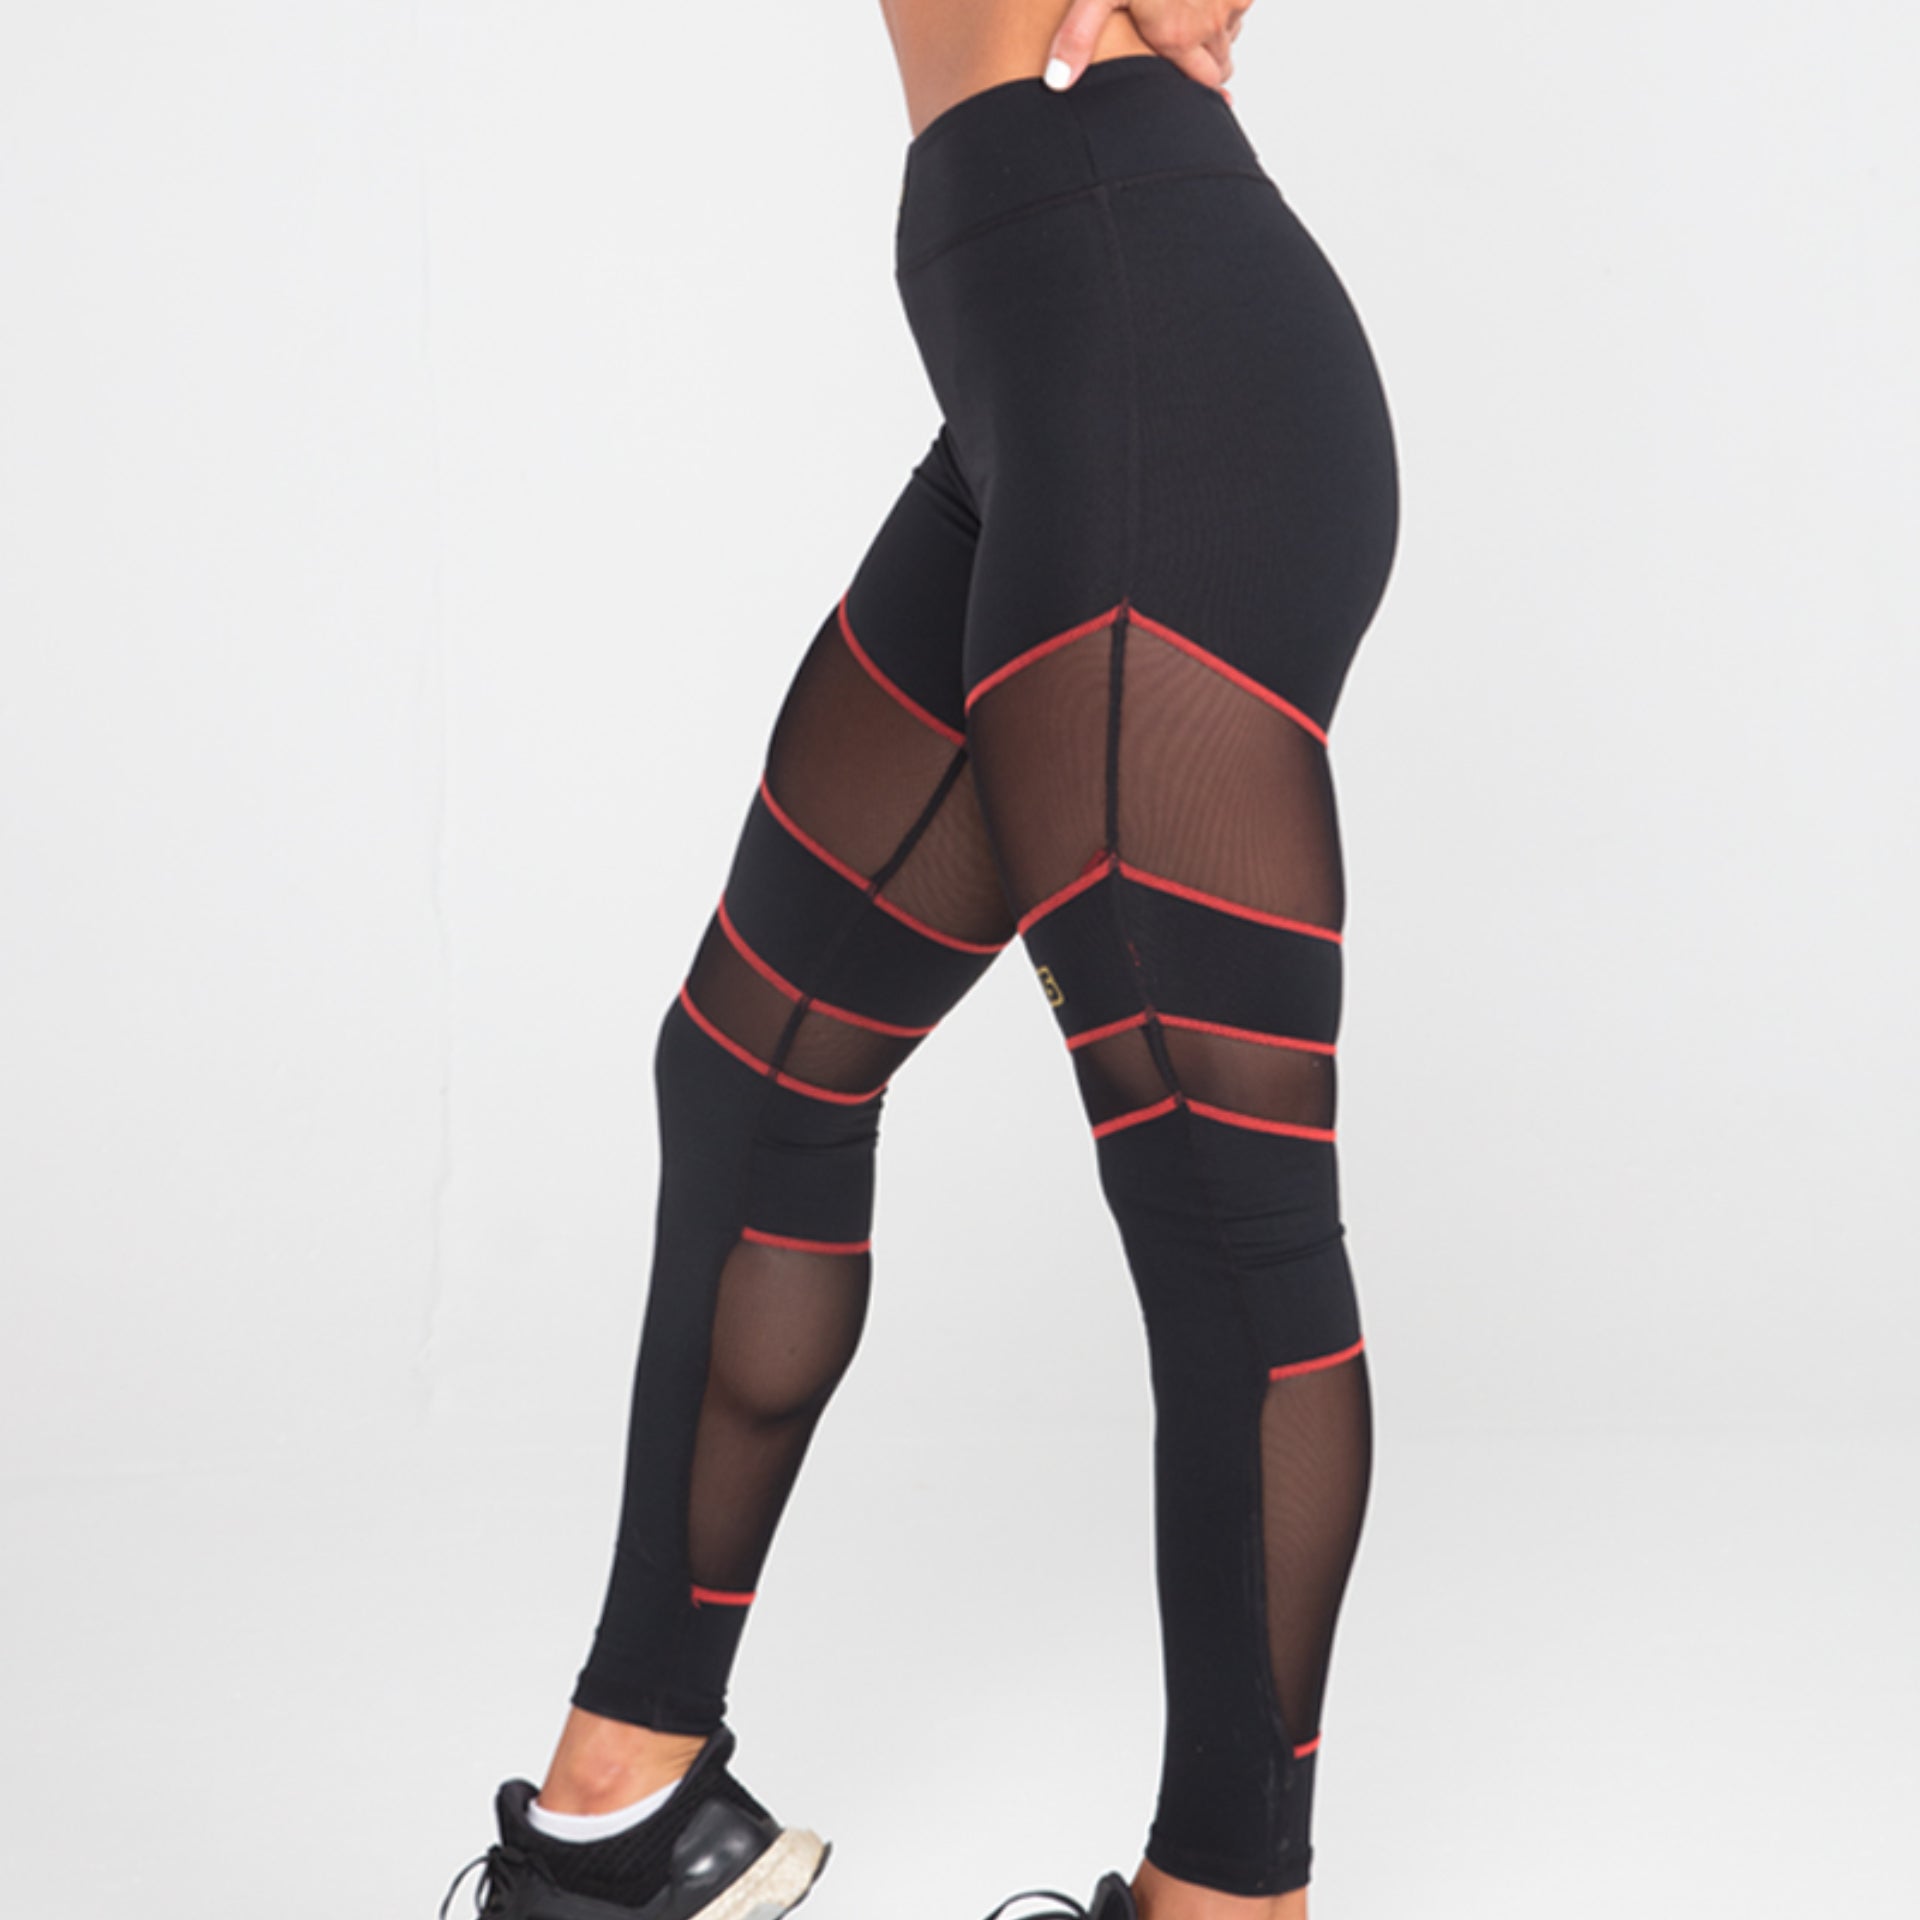 What To Wear With Ripped Leggings? – solowomen